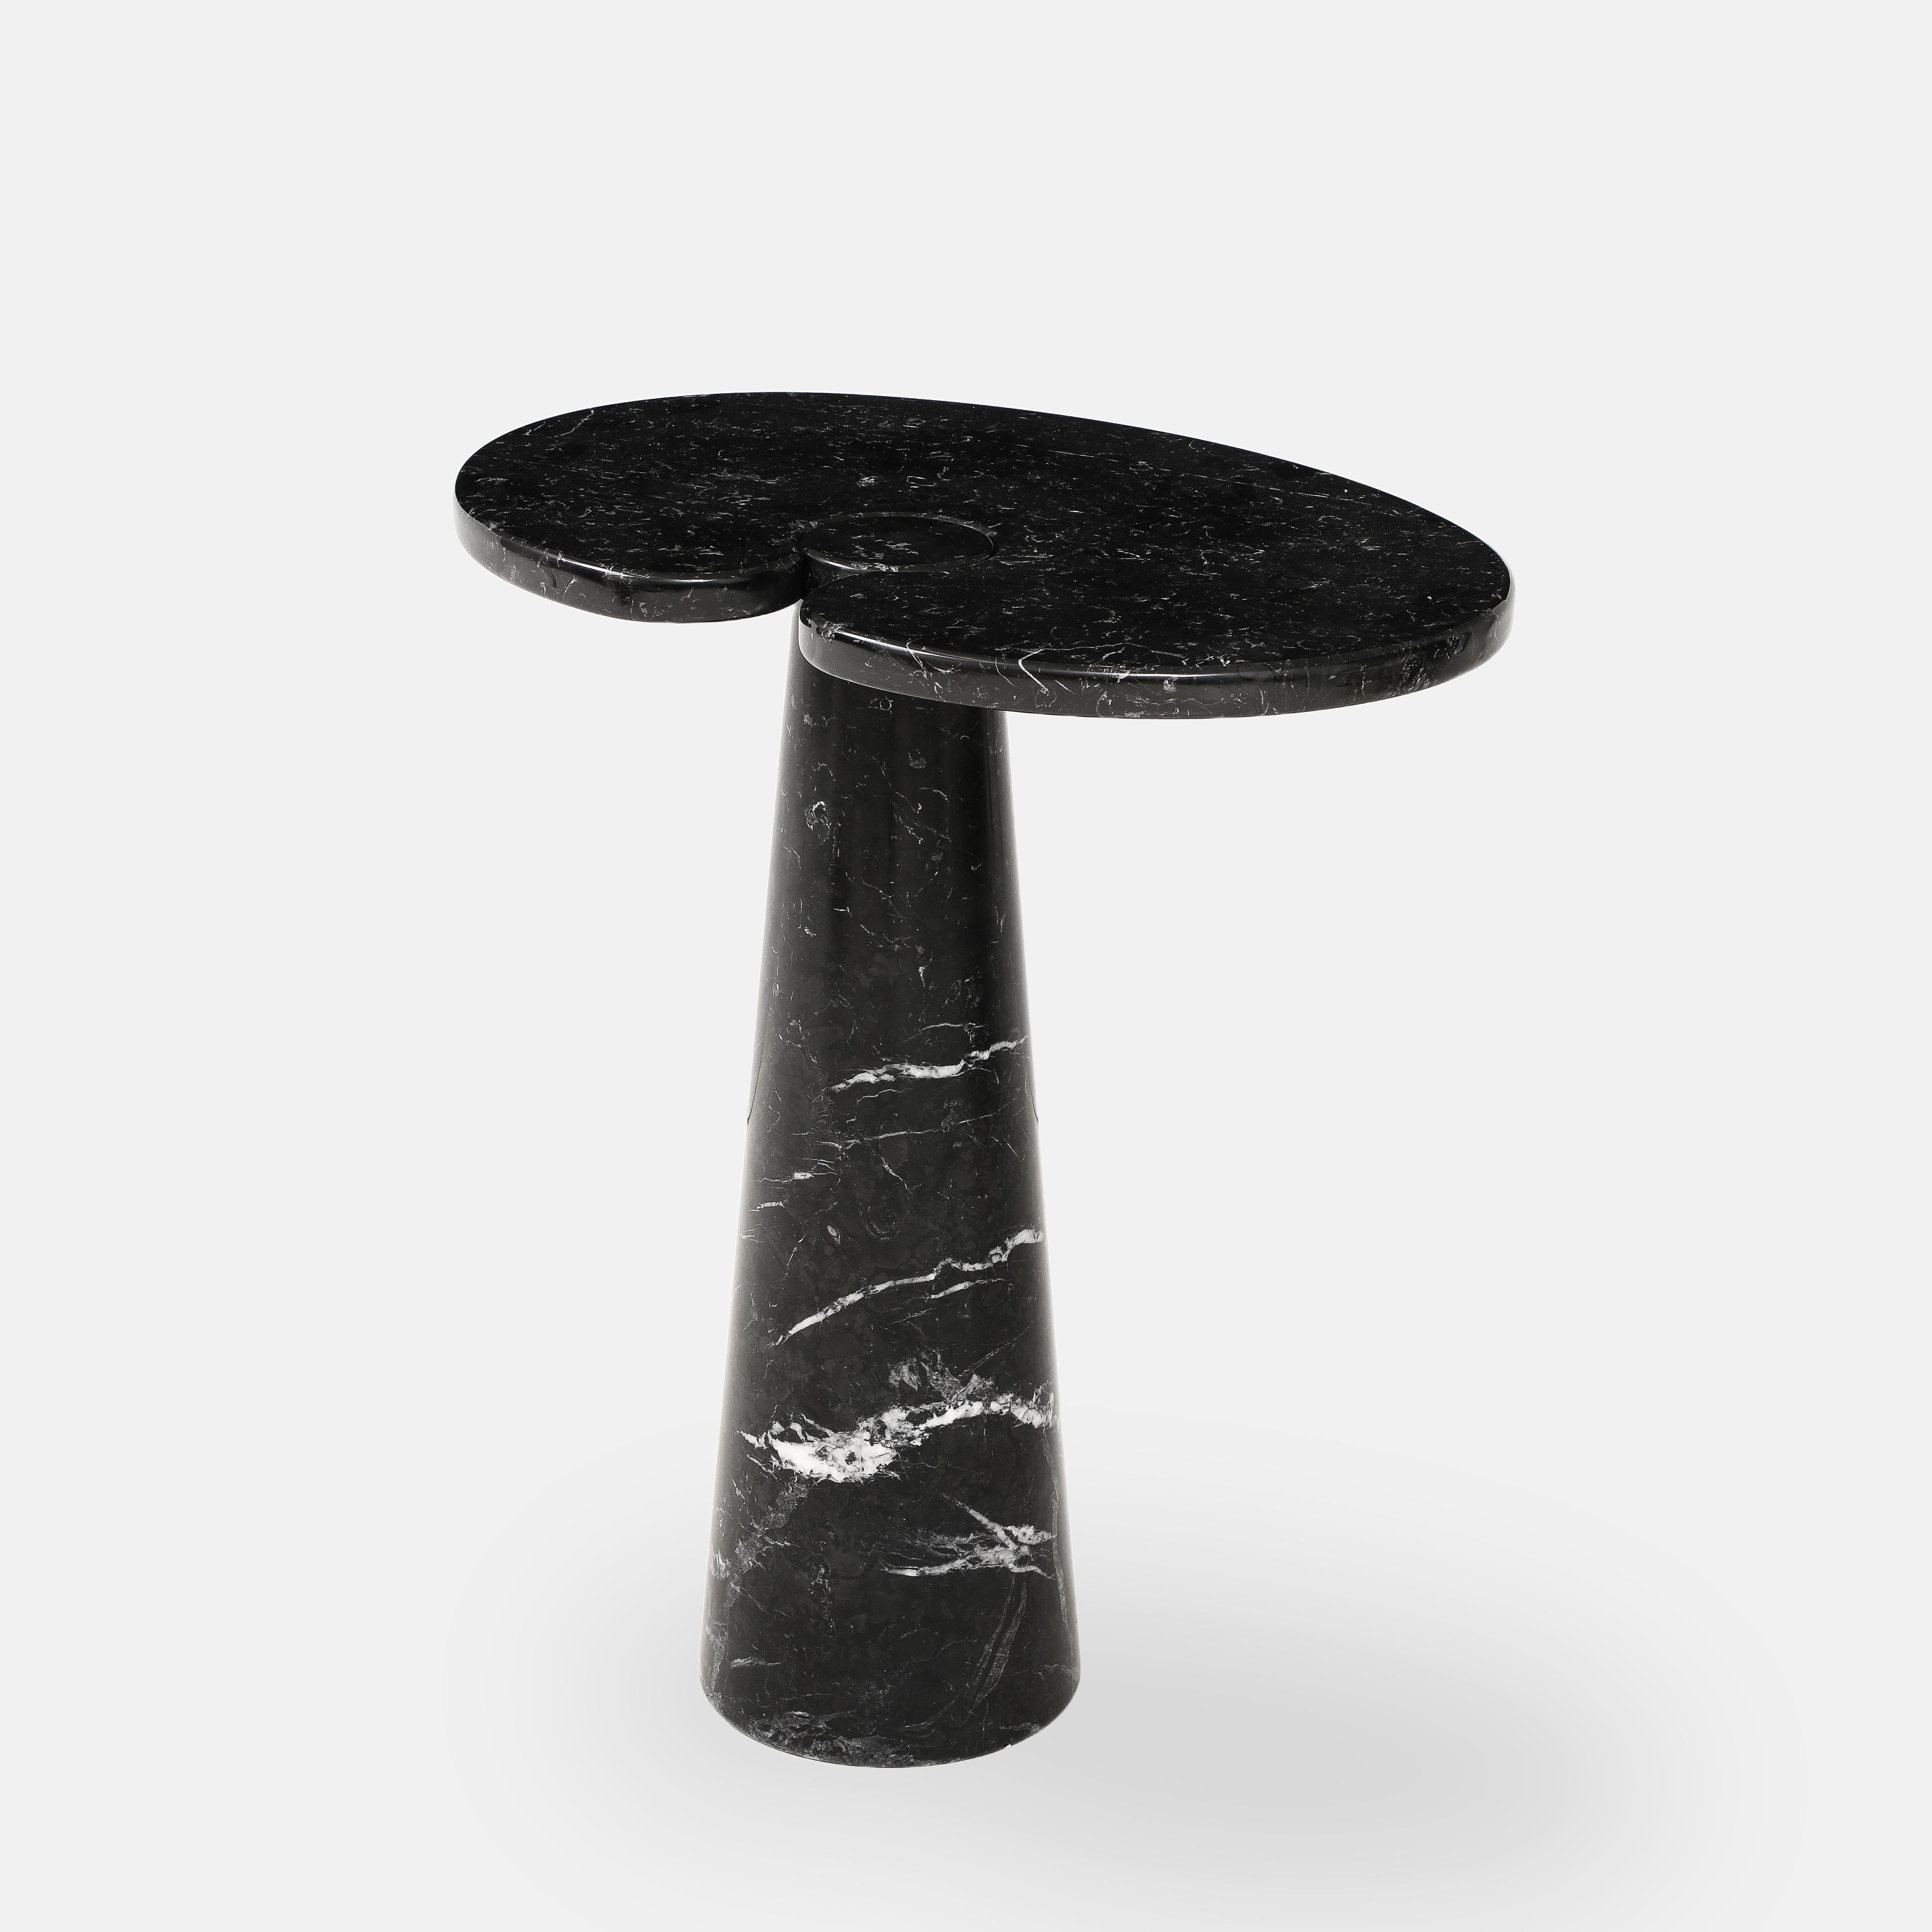 Mid-Century Modern Angelo Mangiarotti Nero Marquina Marble Tall Side Table from Eros Series, 1971 For Sale